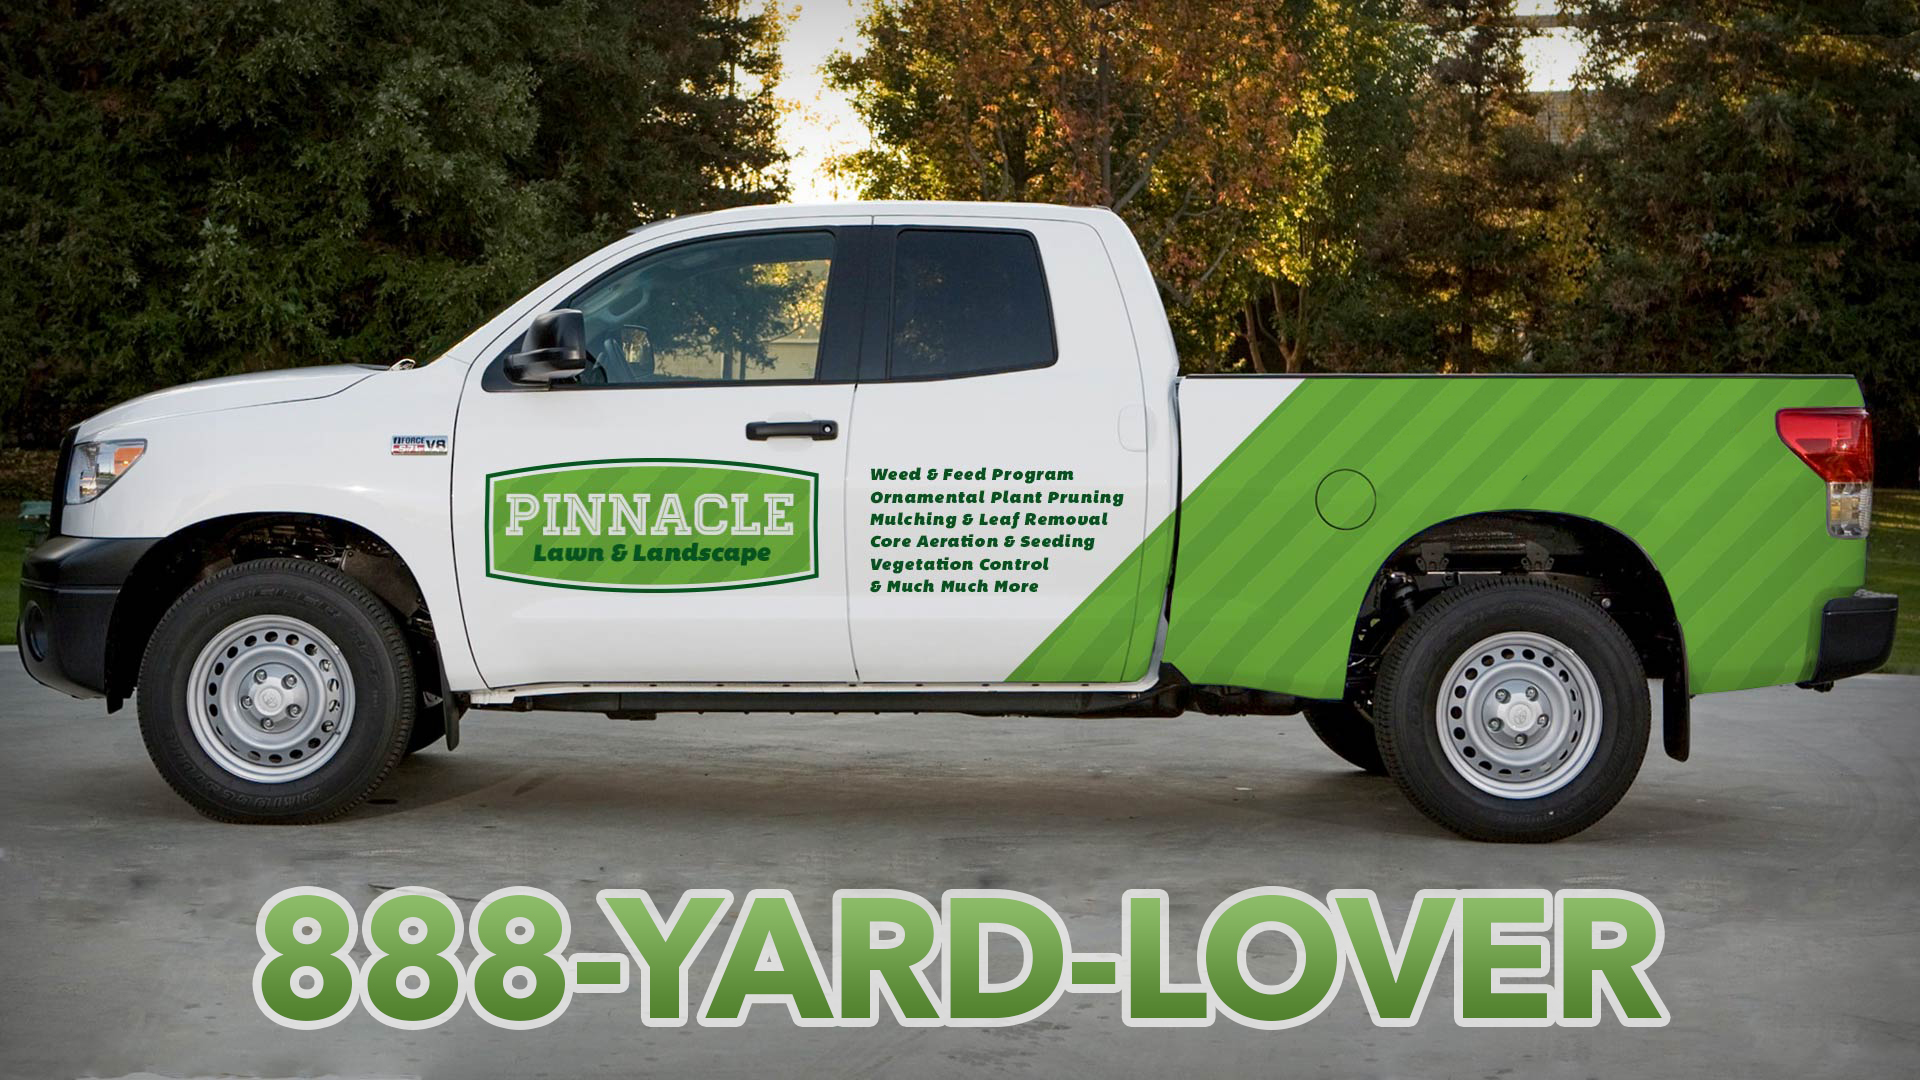 Pinnacle Lawn and Landscape truck using 1-888-YARD-LOVER